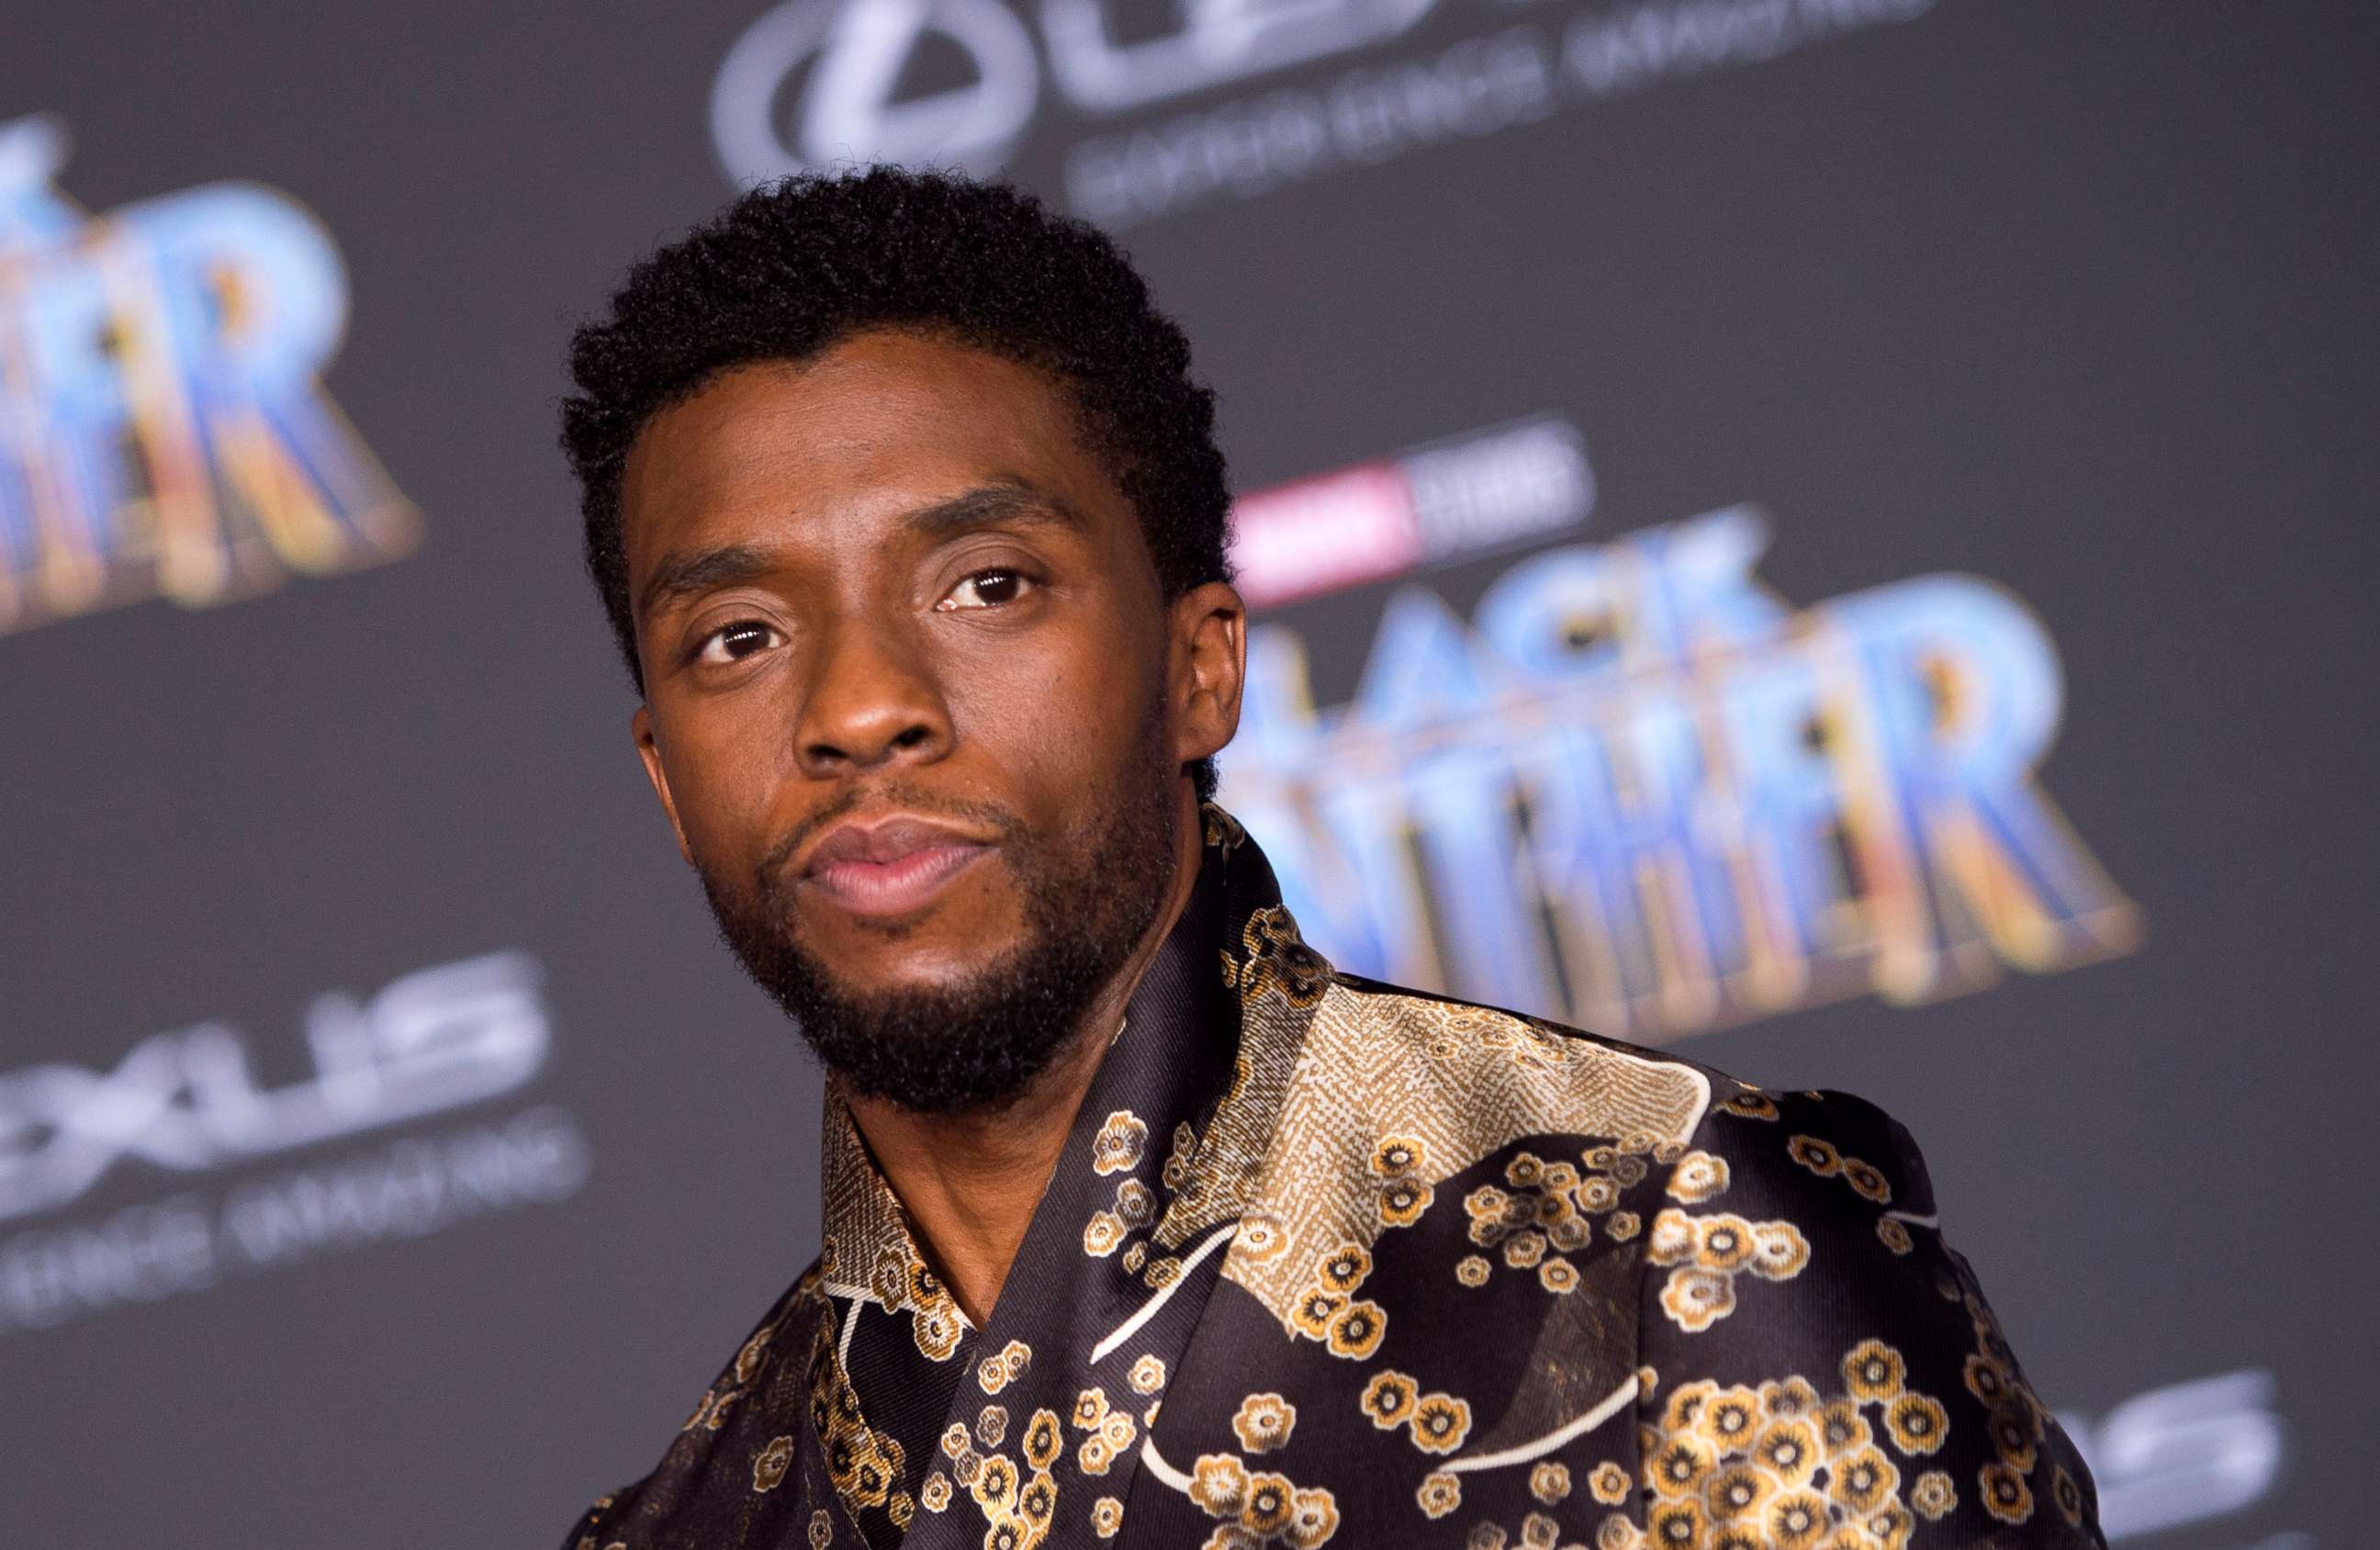 PHOTO: (FILES) In this file photo taken on January 29, 2018 Actor Chadwick Boseman attends the world premiere of Marvel Studios "Black Panther," in Hollywood. - August 28, 2020 Chadwick Boseman died of cancer, he was 43. 